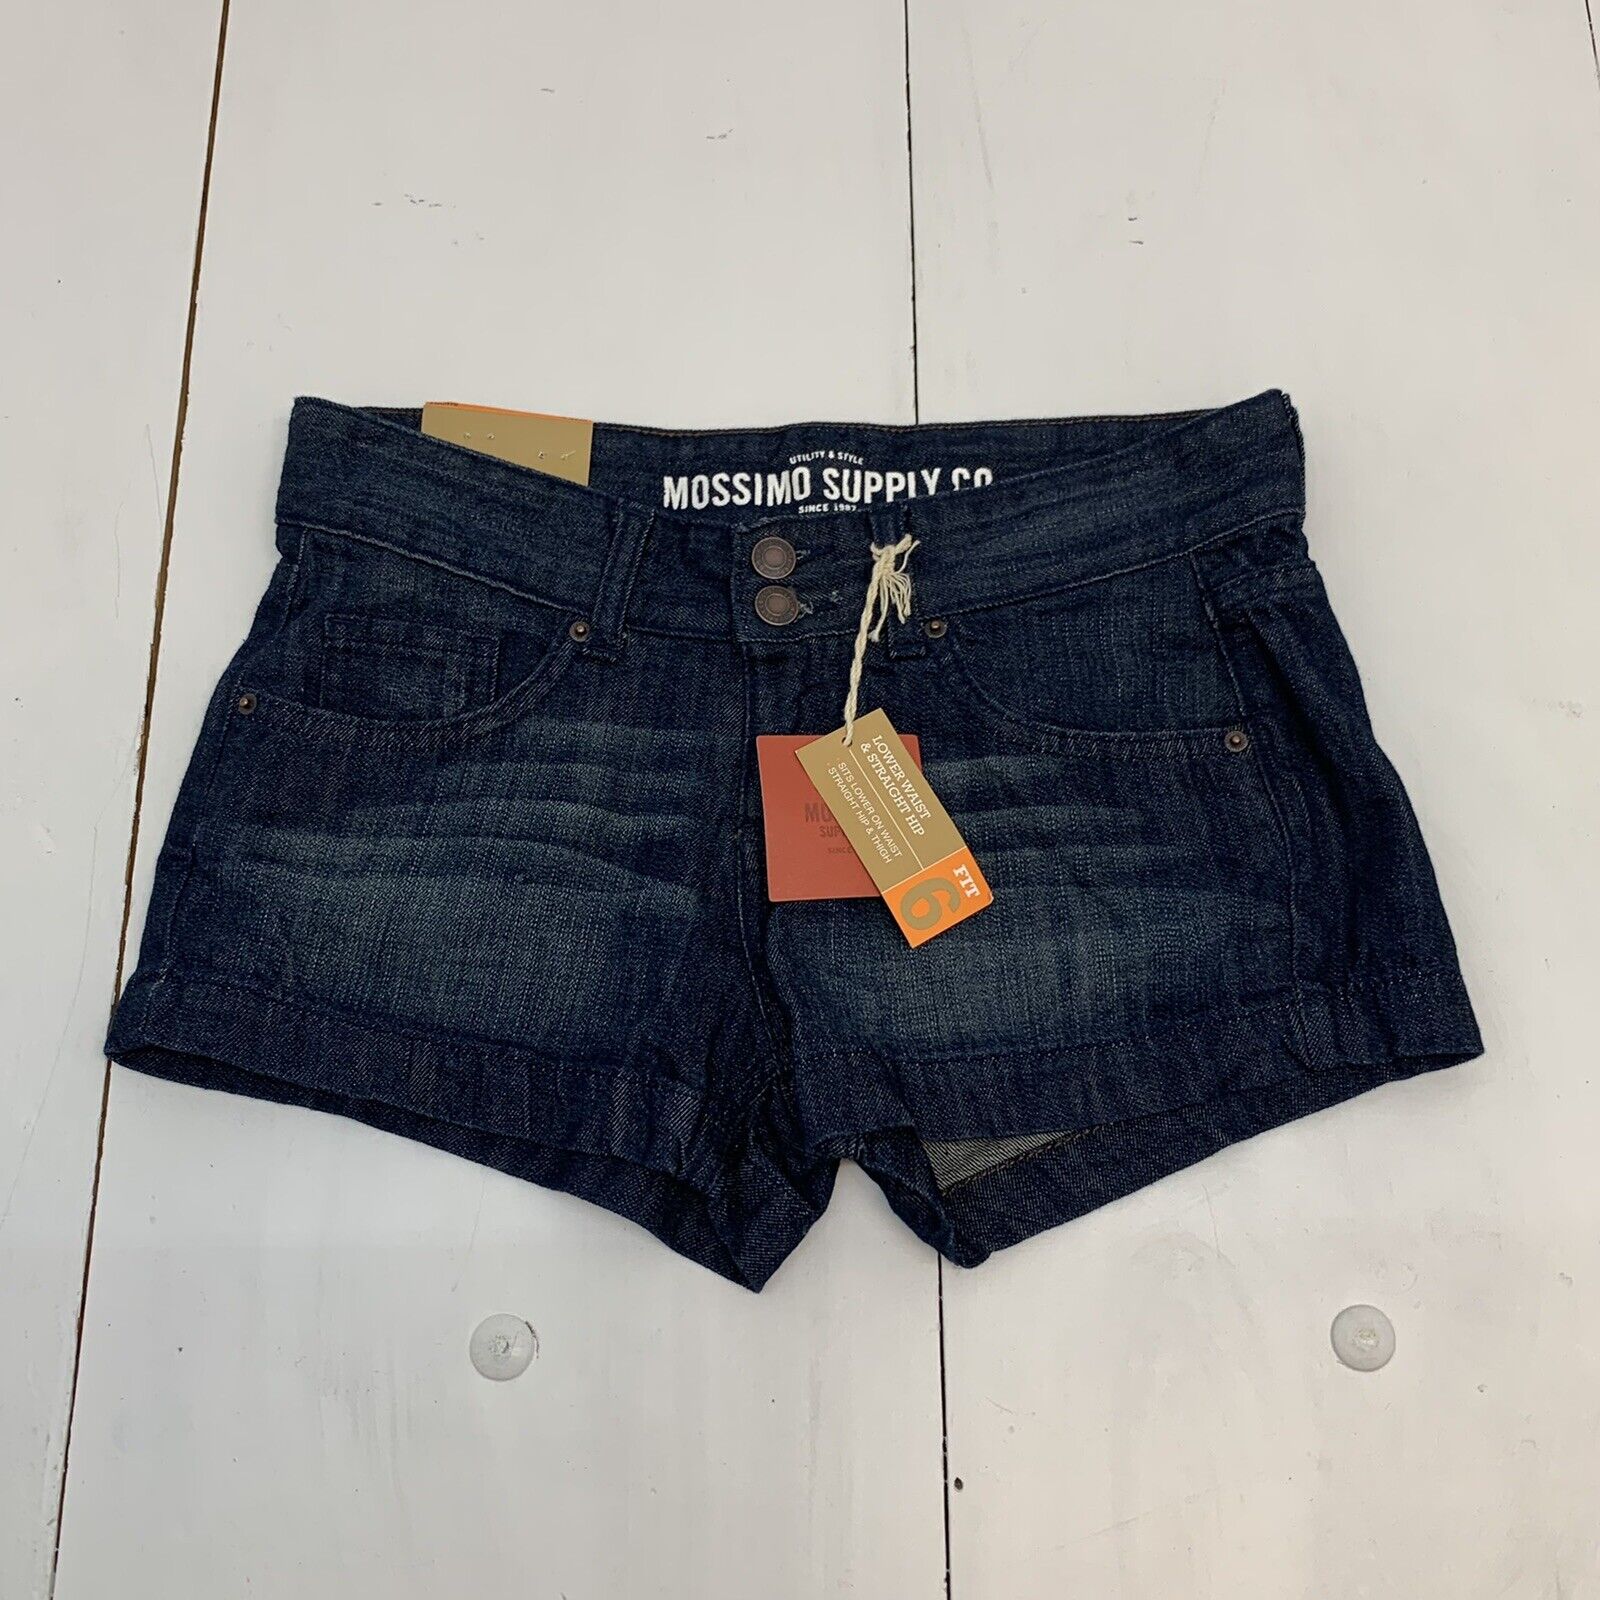 Mossimo Supply Denim Shorts Size 5 Fit 6